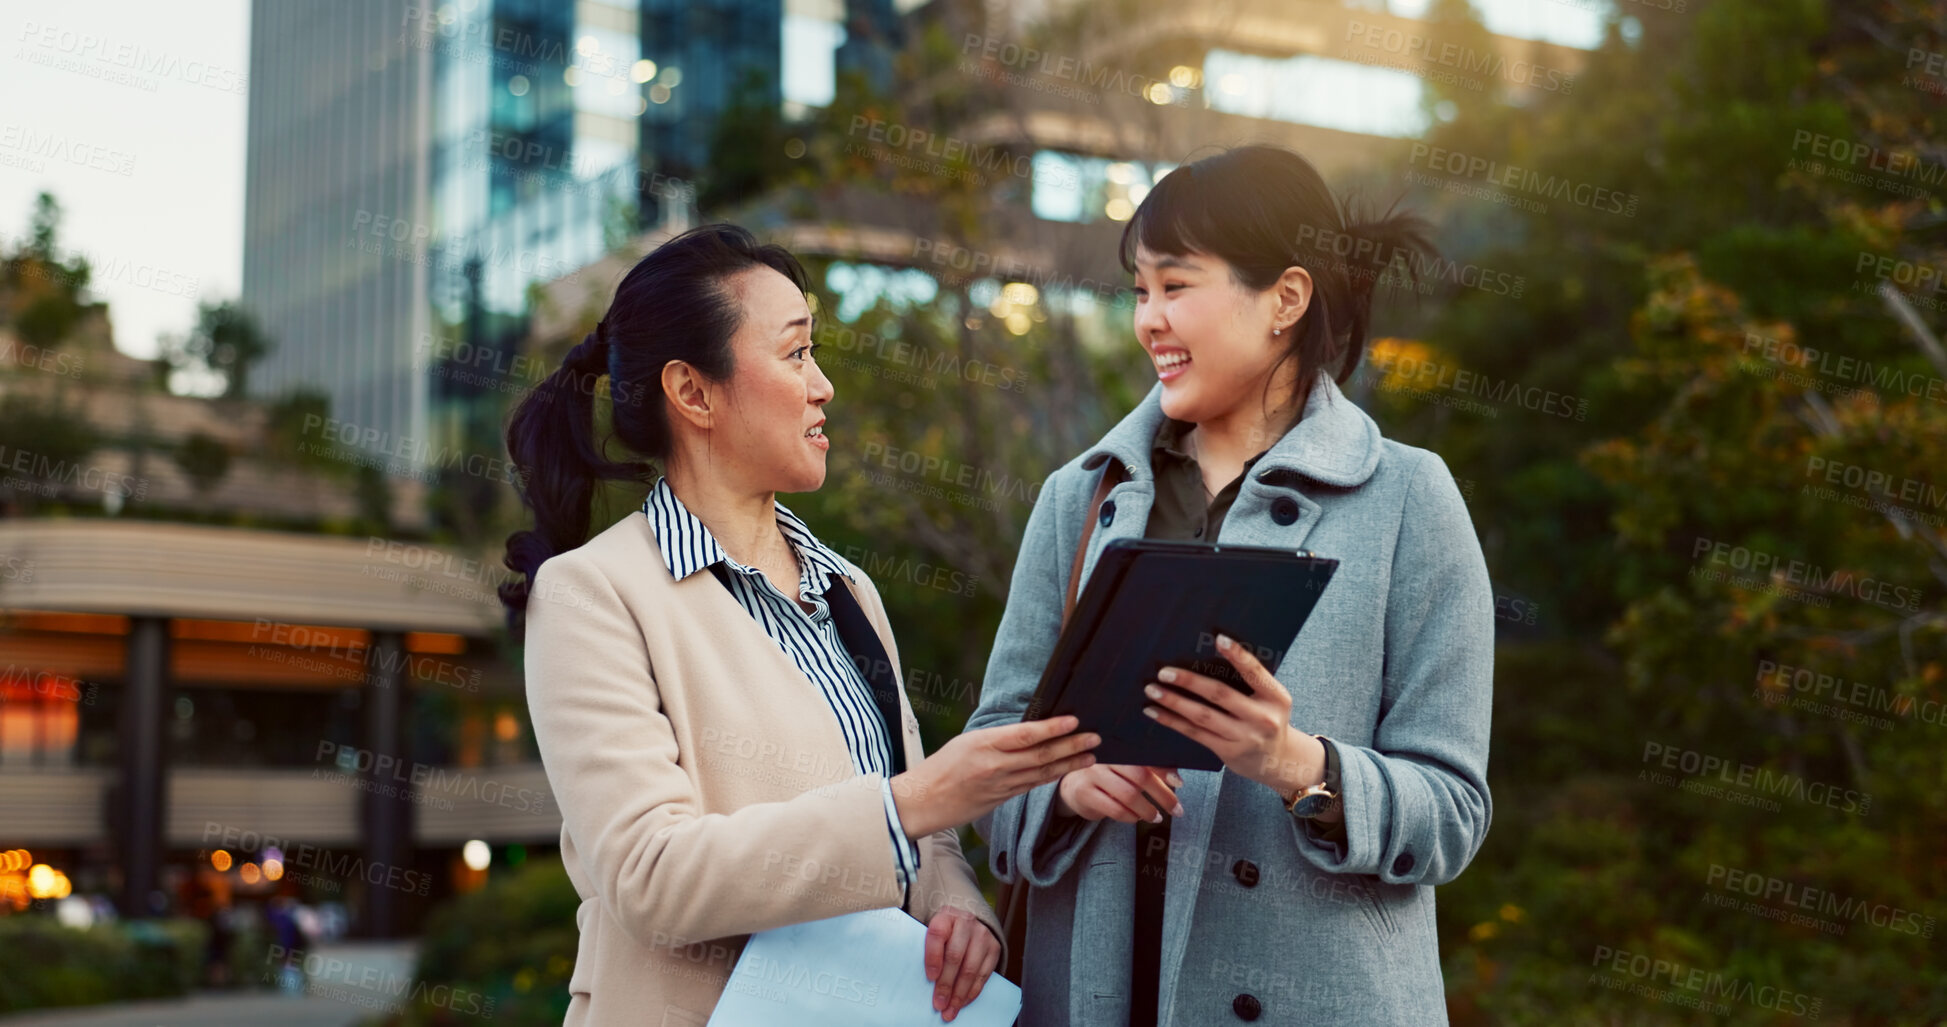 Buy stock photo Tablet, conversation and business women in the city talking for communication or bonding. Smile, discussion and professional Asian female people speaking with digital technology together in town.